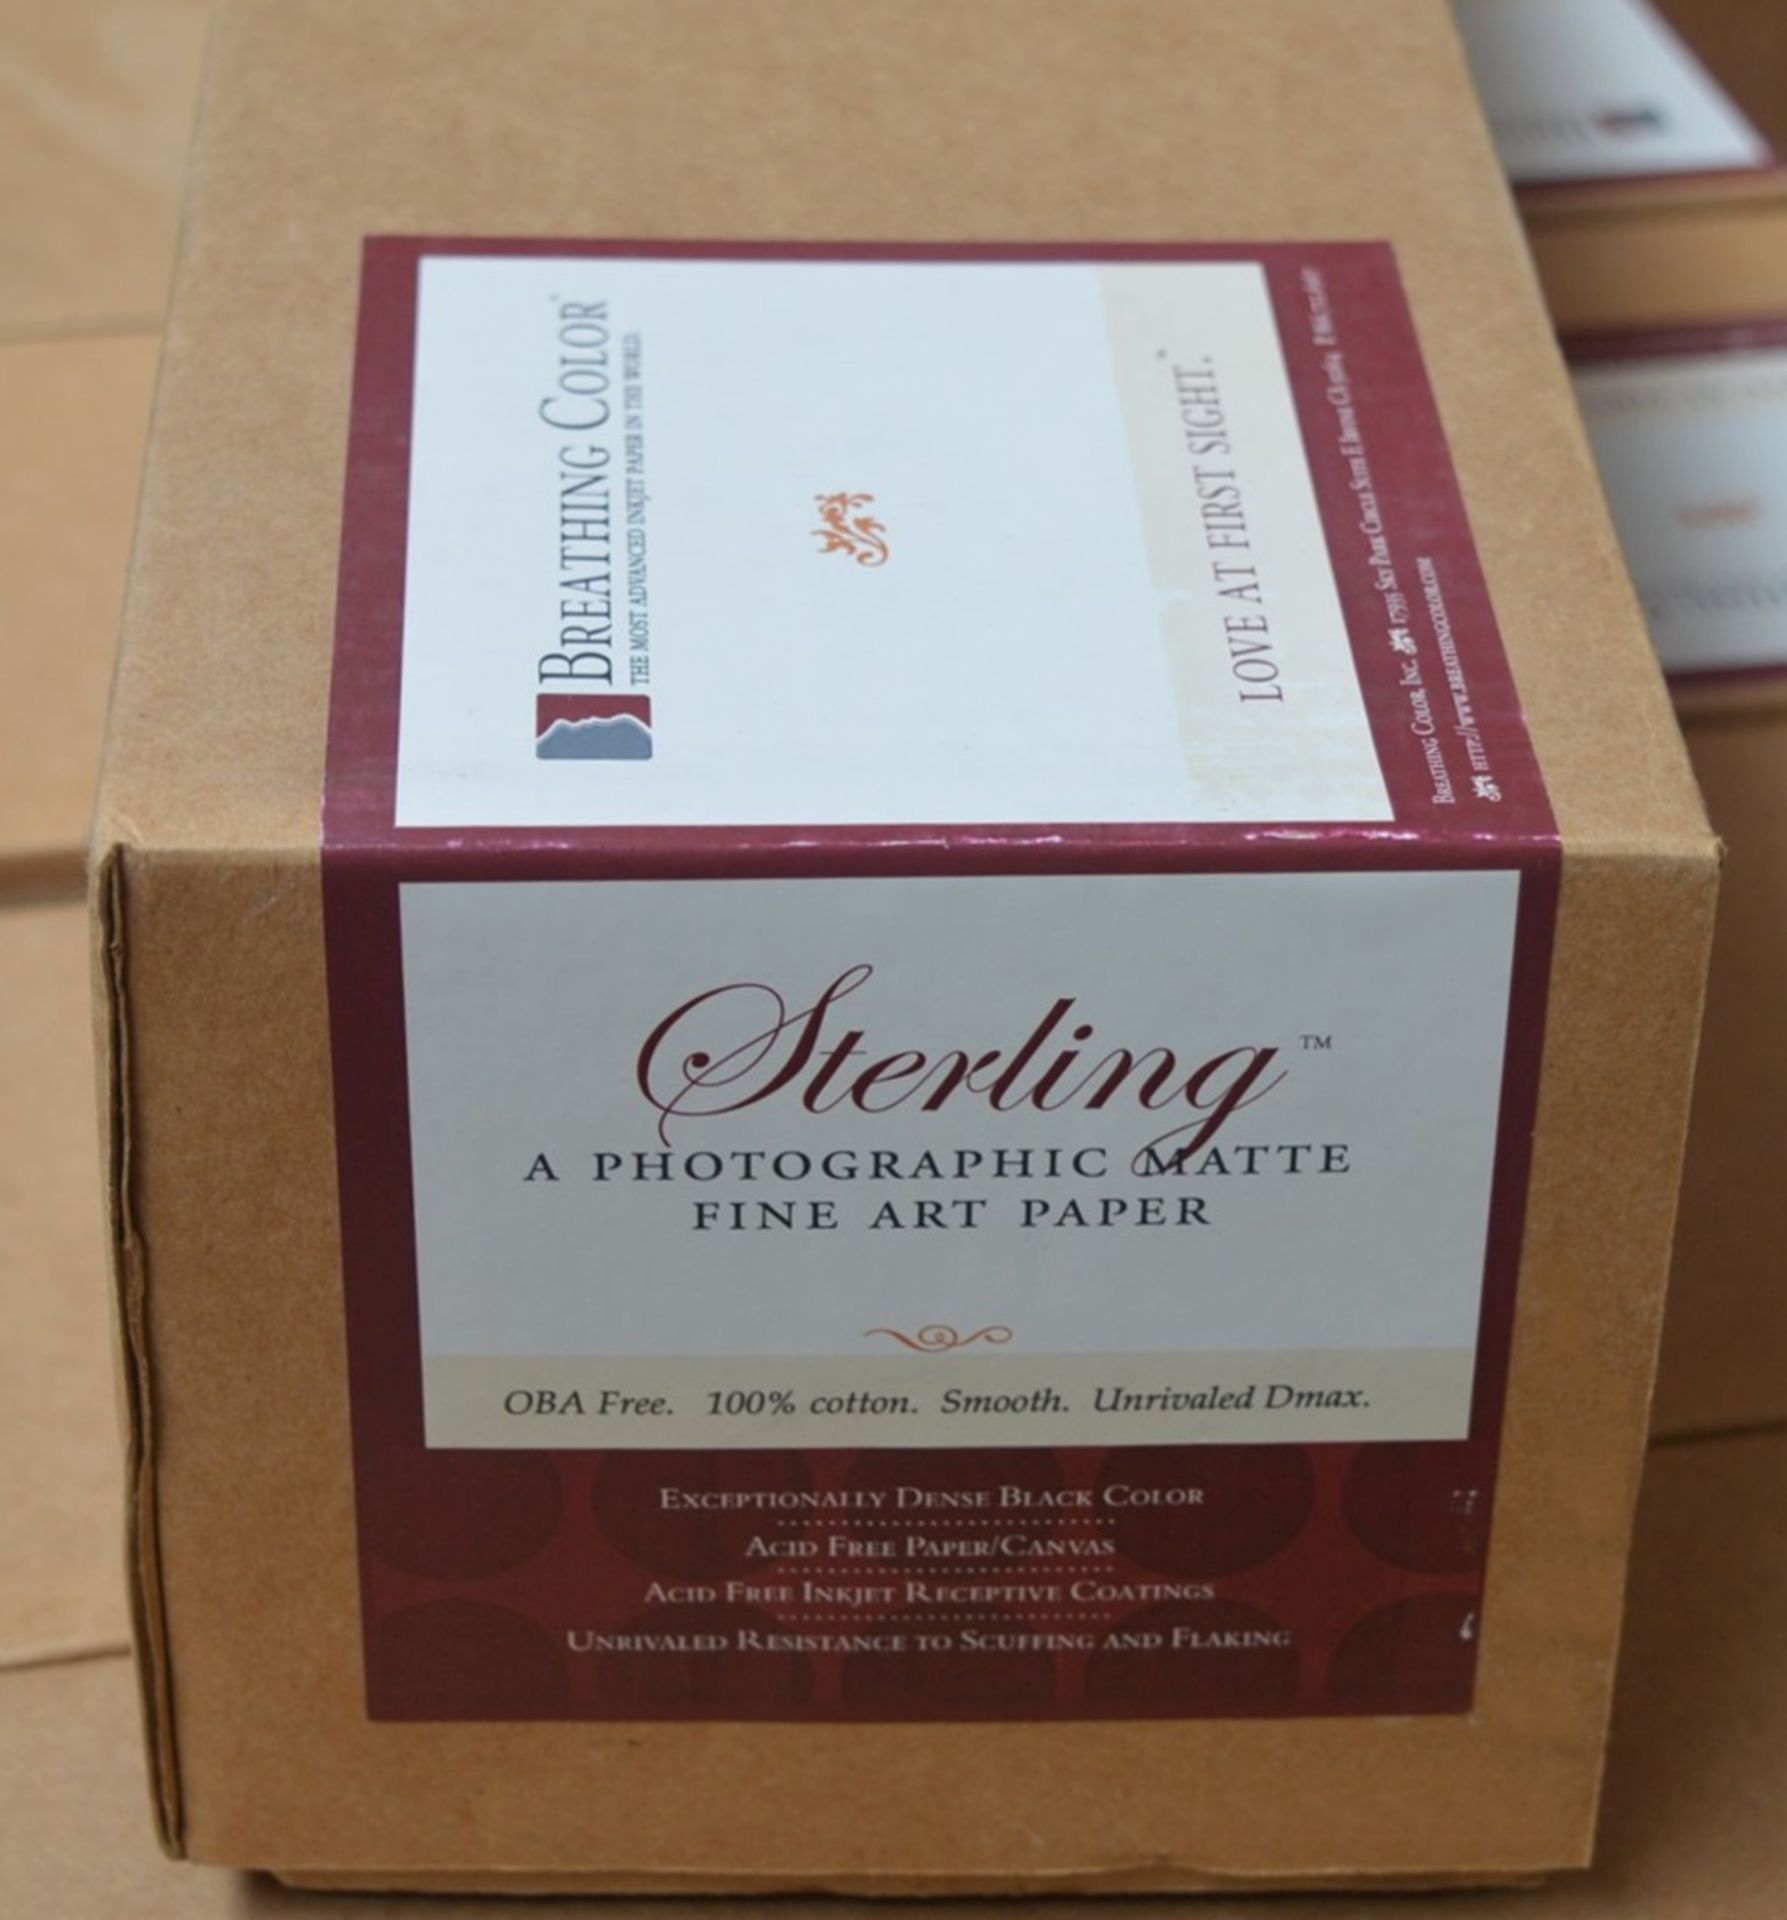 5 x Rolls of Breathing Colour STERLING Photographic Matte Fine Art Paper - Size 24" x 40' - 205gsm - - Image 3 of 5